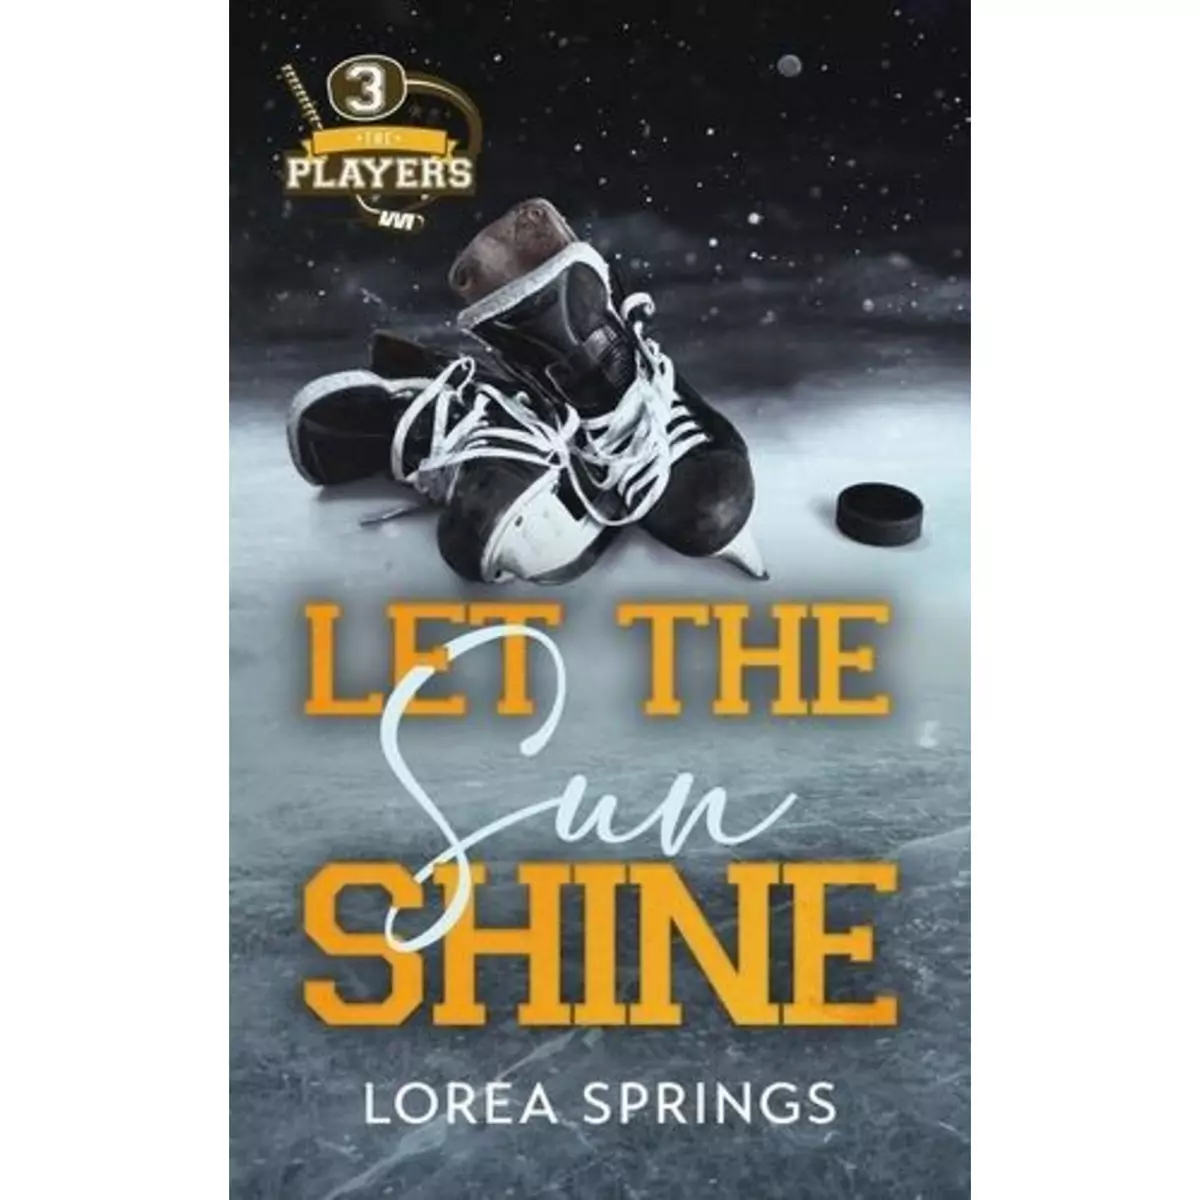  THE PLAYERS TOME 3 : LET THE SUN SHINE, Springs Lorea